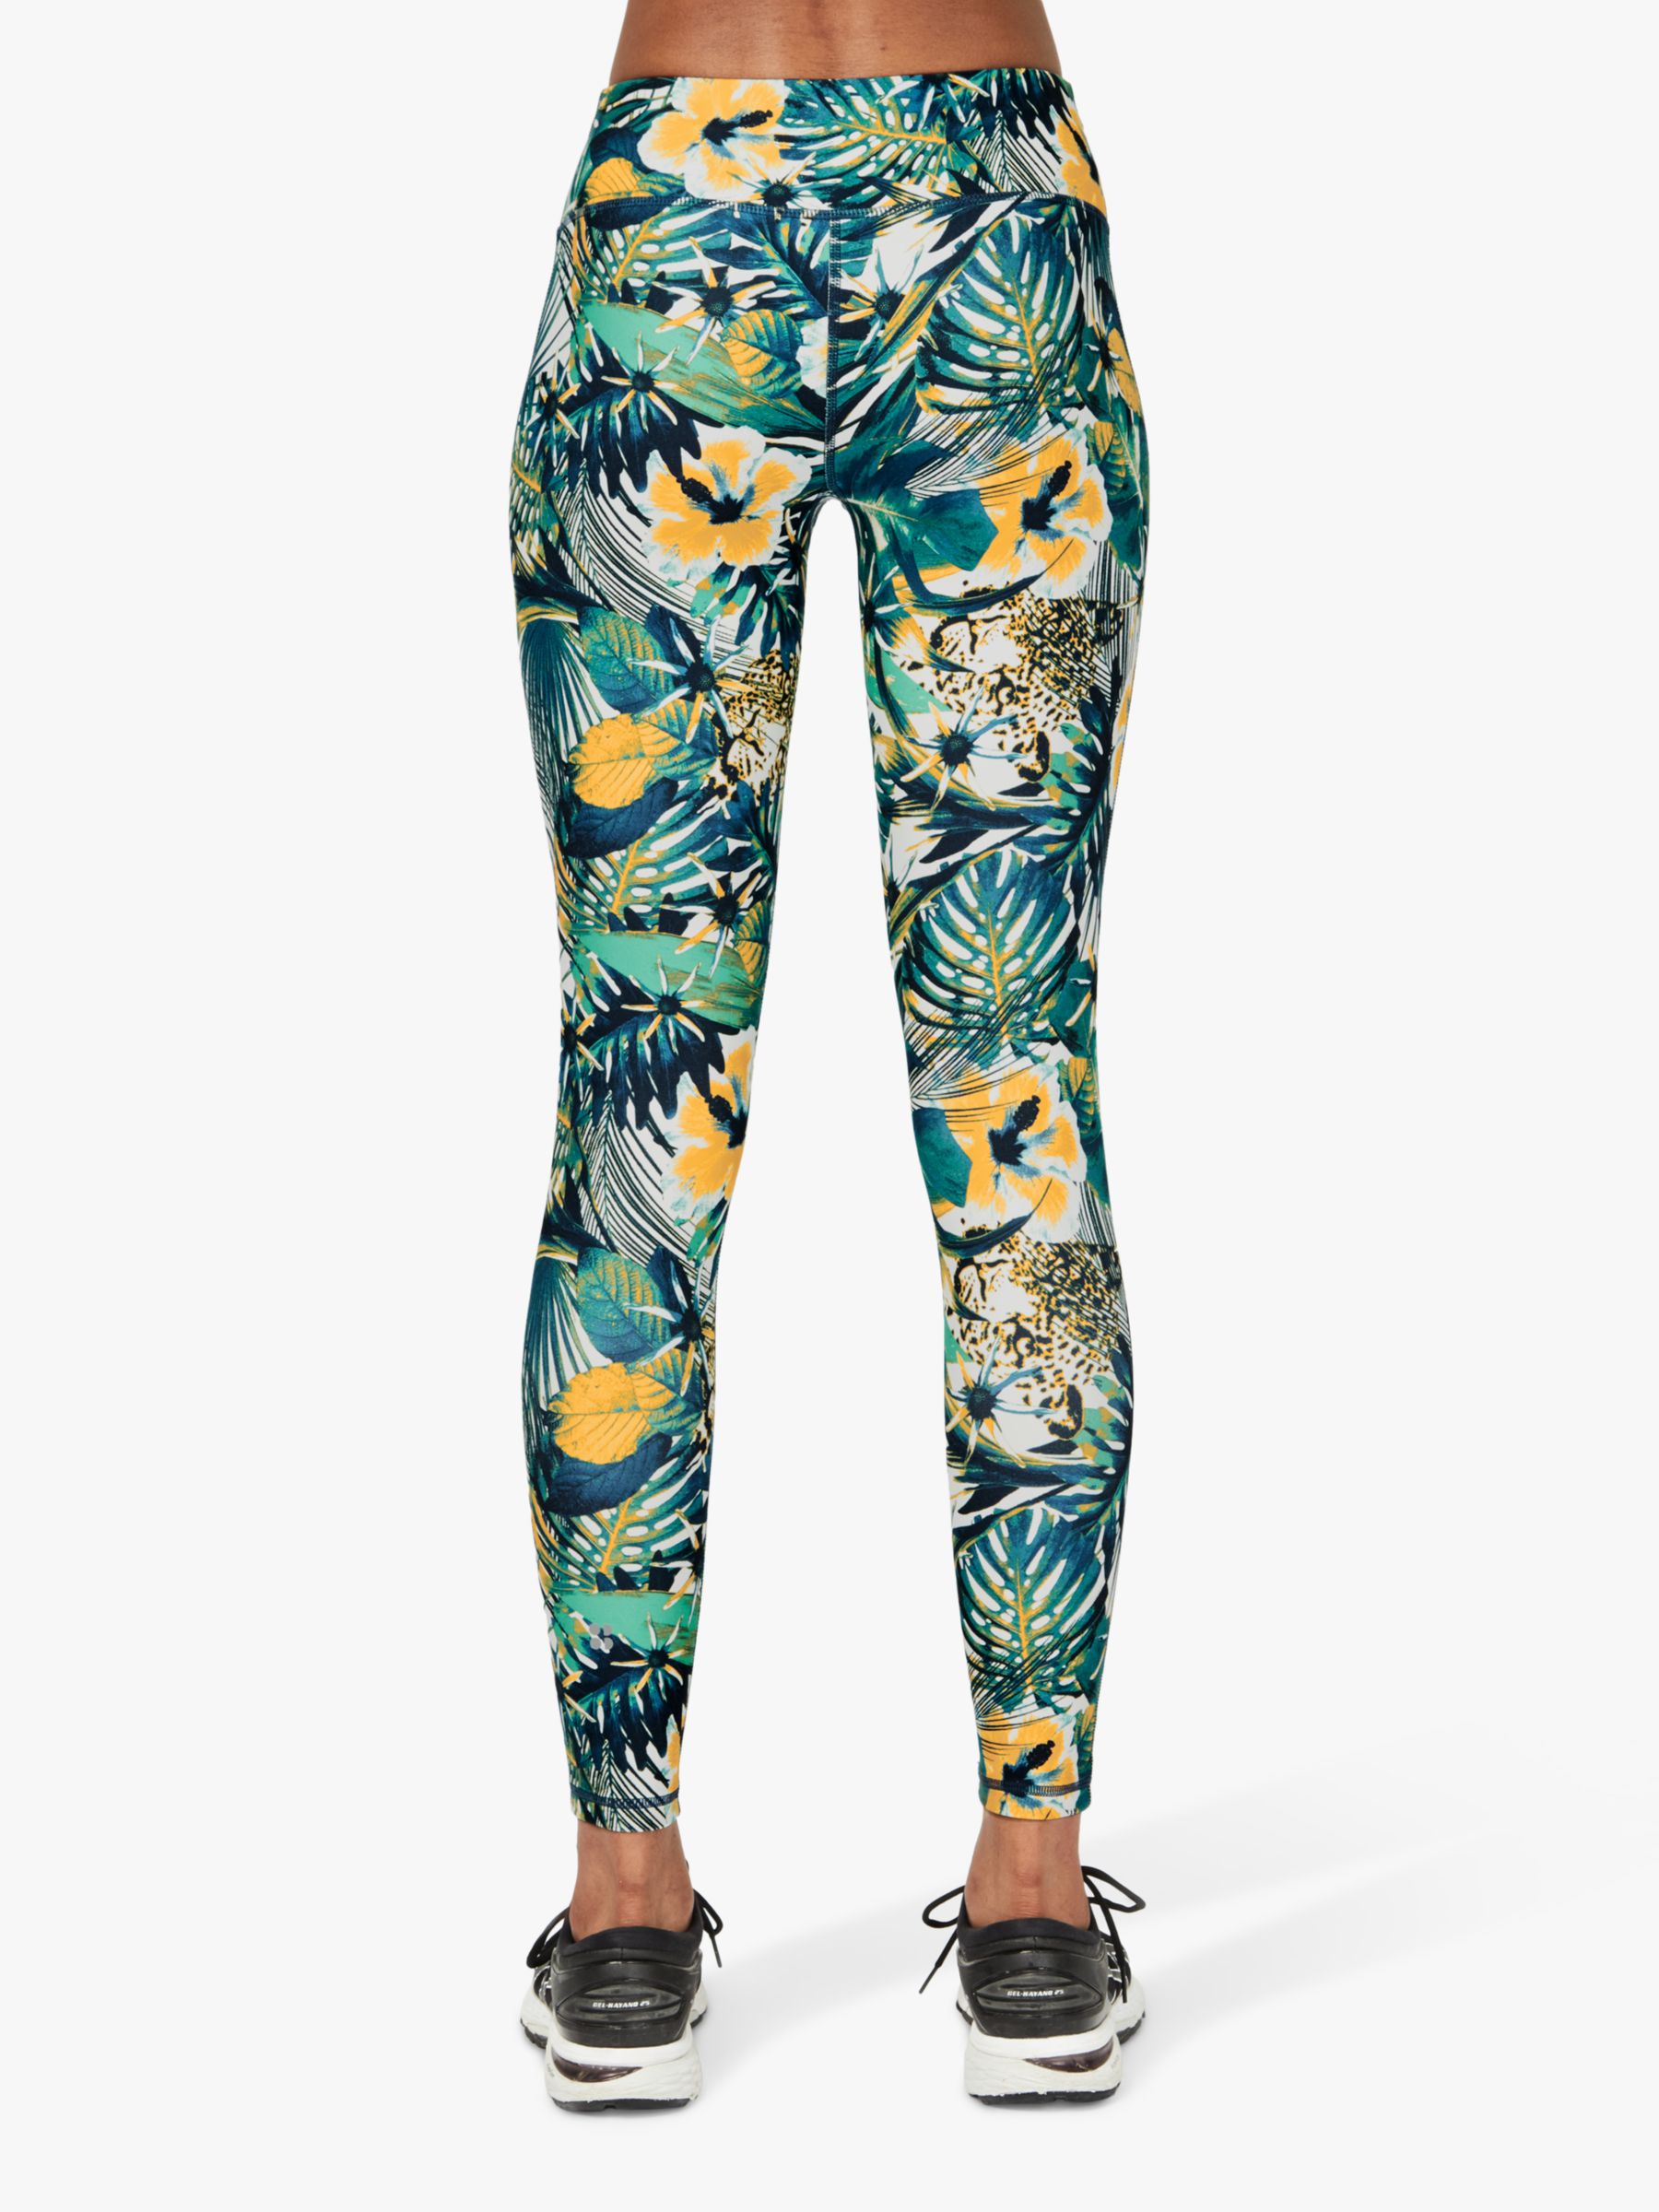 Sweaty Betty All Day Contour Workout Leggings, Green Hibiscus Floral Print